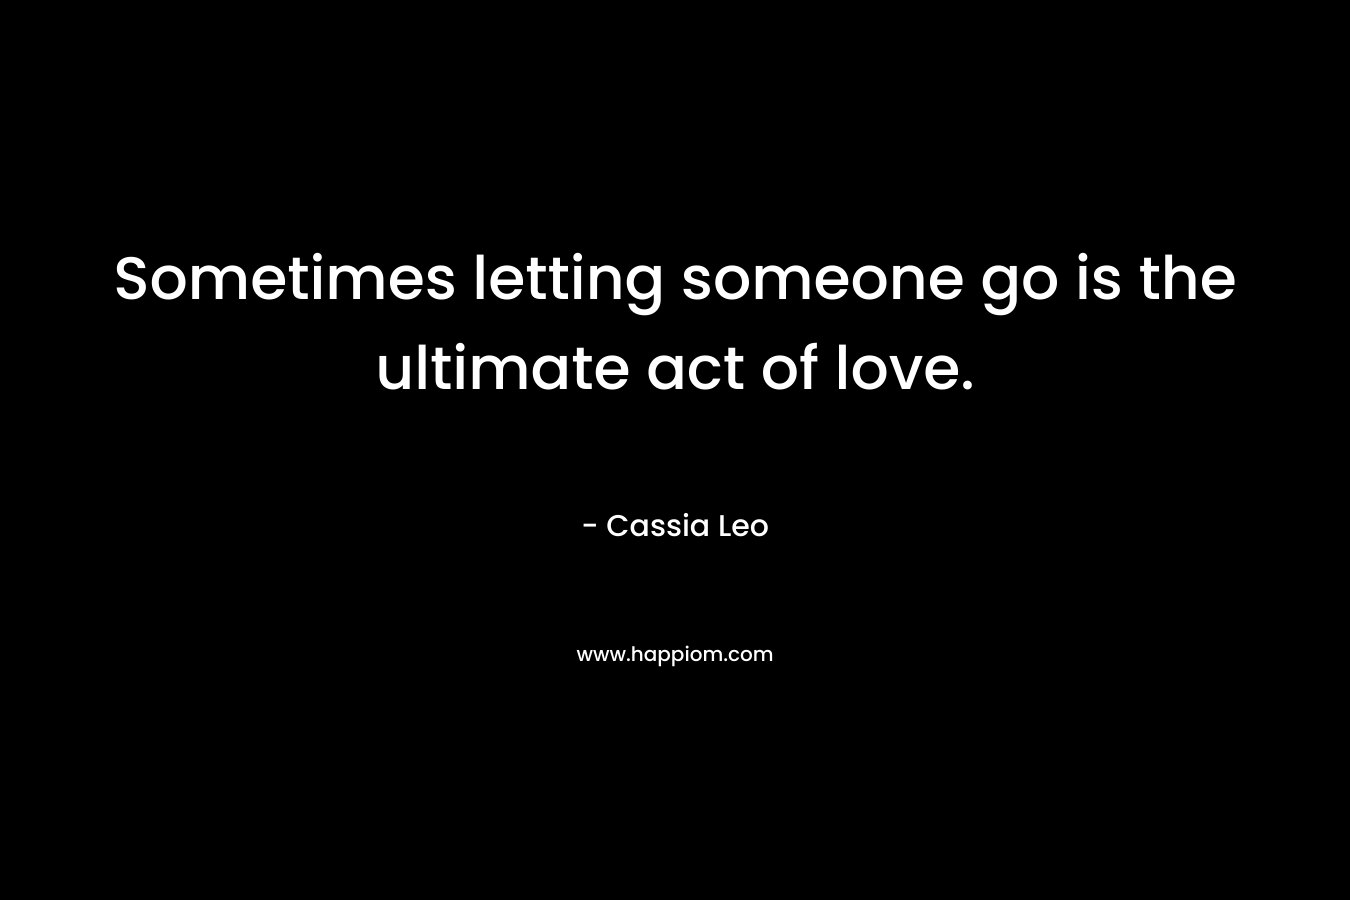 Sometimes letting someone go is the ultimate act of love. – Cassia Leo